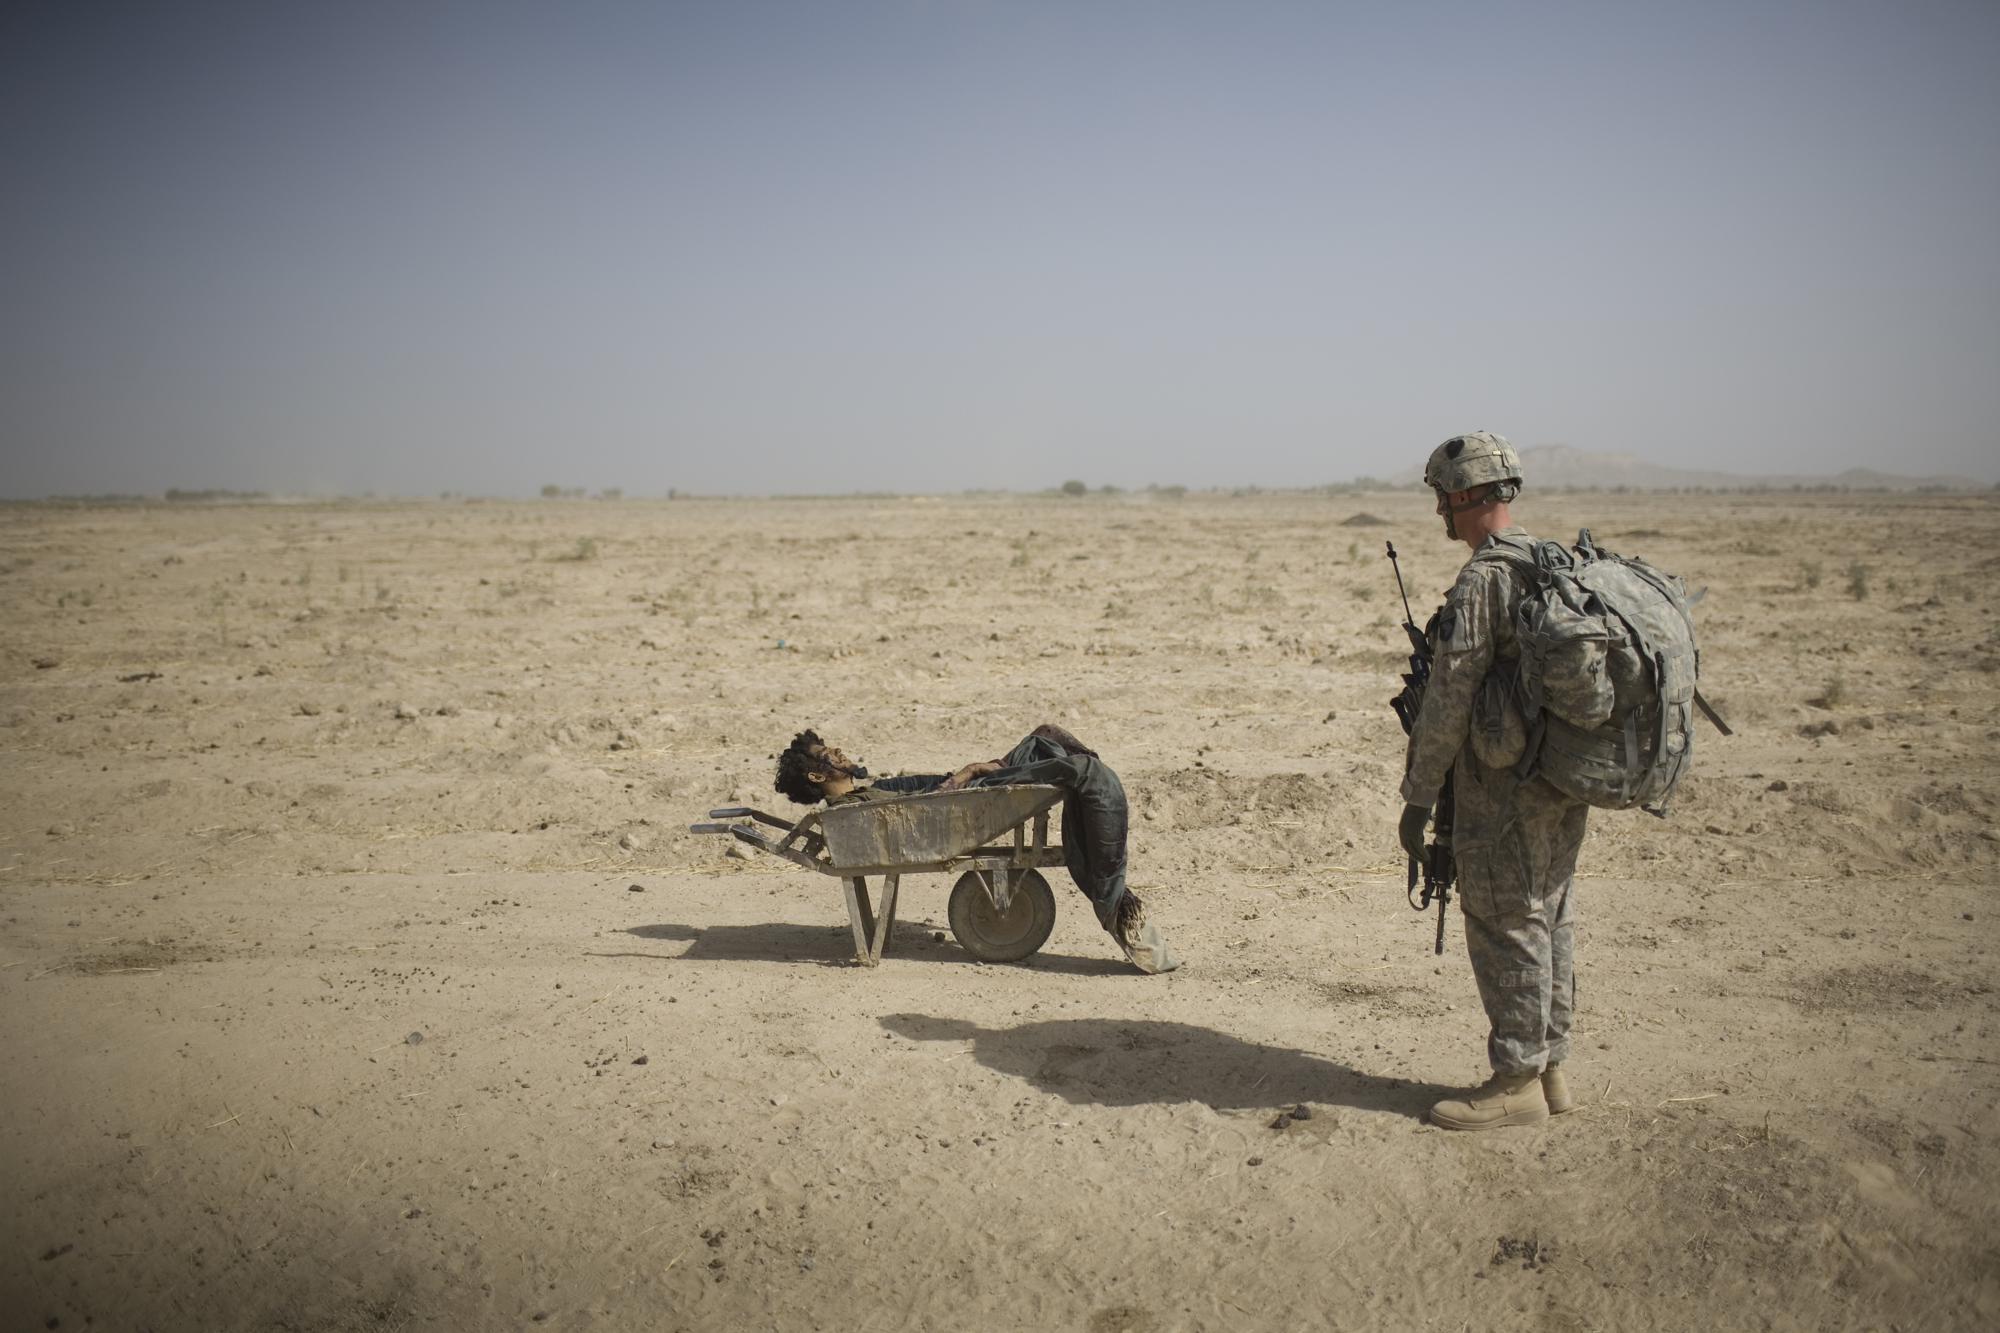 A U.S. Army soldier from Scout Platoon 502 Infantry Regiment, 101st Airborne Division, looks at the body of a suspected Taliban IED emplacer who was killed in a coalition missile strike in Zhari district, Kandahar province, Sunday, Oct. 10, 2010. The Scouts' mission was to support roadside bomb clearance efforts in the militant stronghold, the latest days-long phase of Operation Dragon Strike. (AP Photo/Rodrigo Abd)